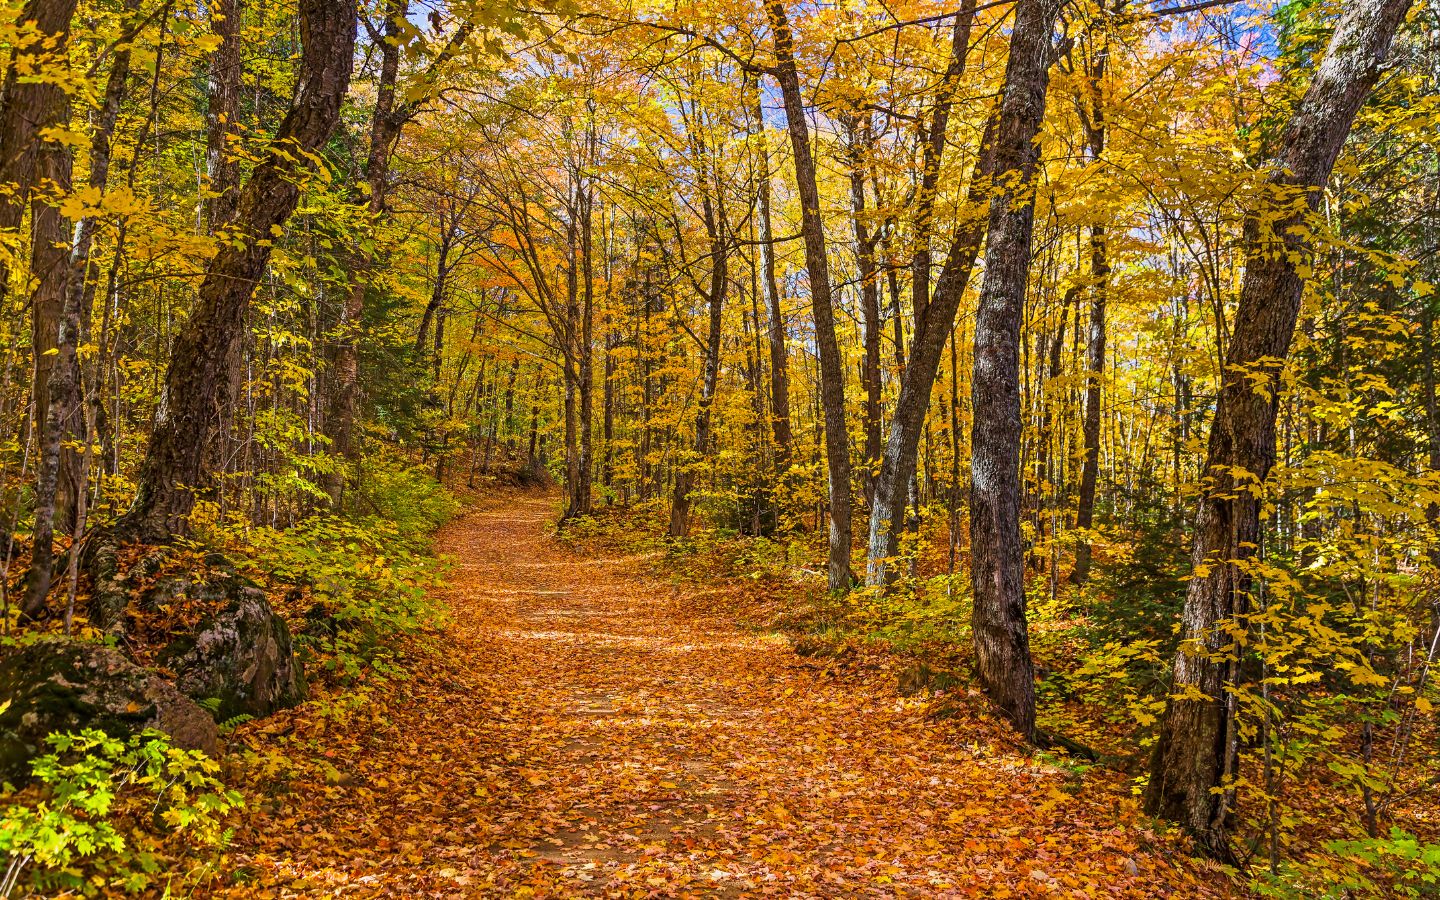 A path covered with red and orange foliage meandering through the woods with bright yellow foliage